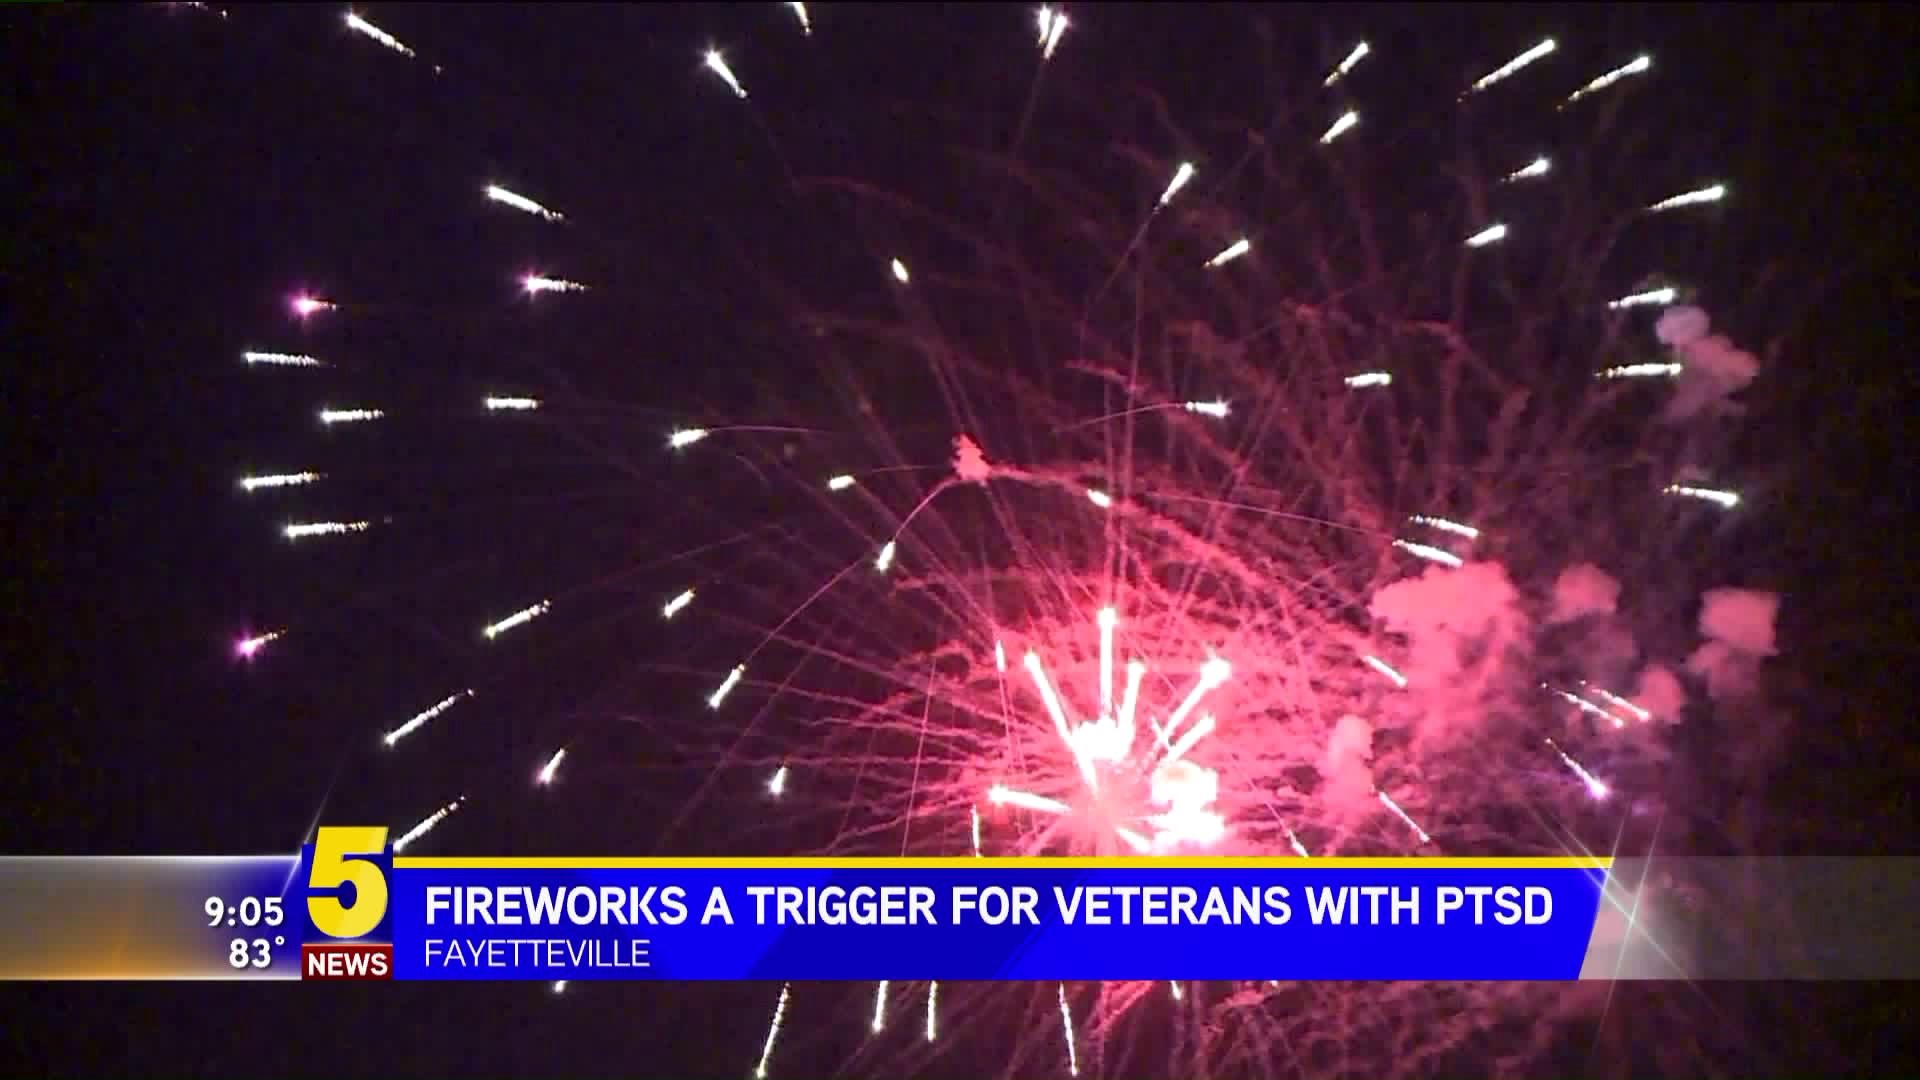 Fireworks A Trigger For Veterans With PTSD